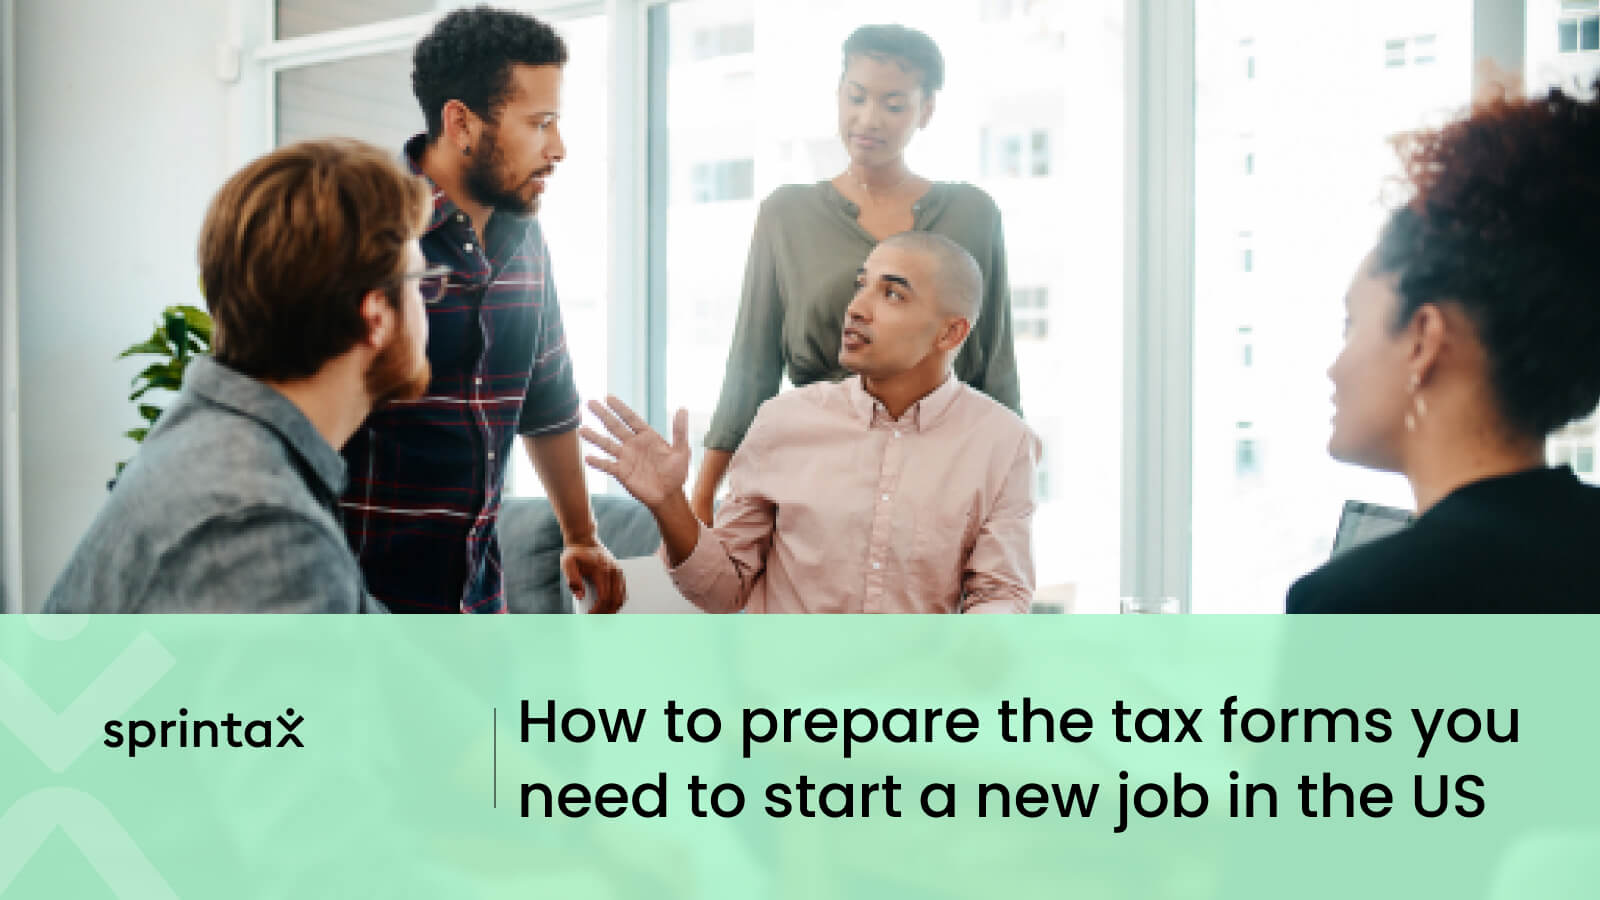 How to fill out your tax forms for a new job on CPT/OPT online